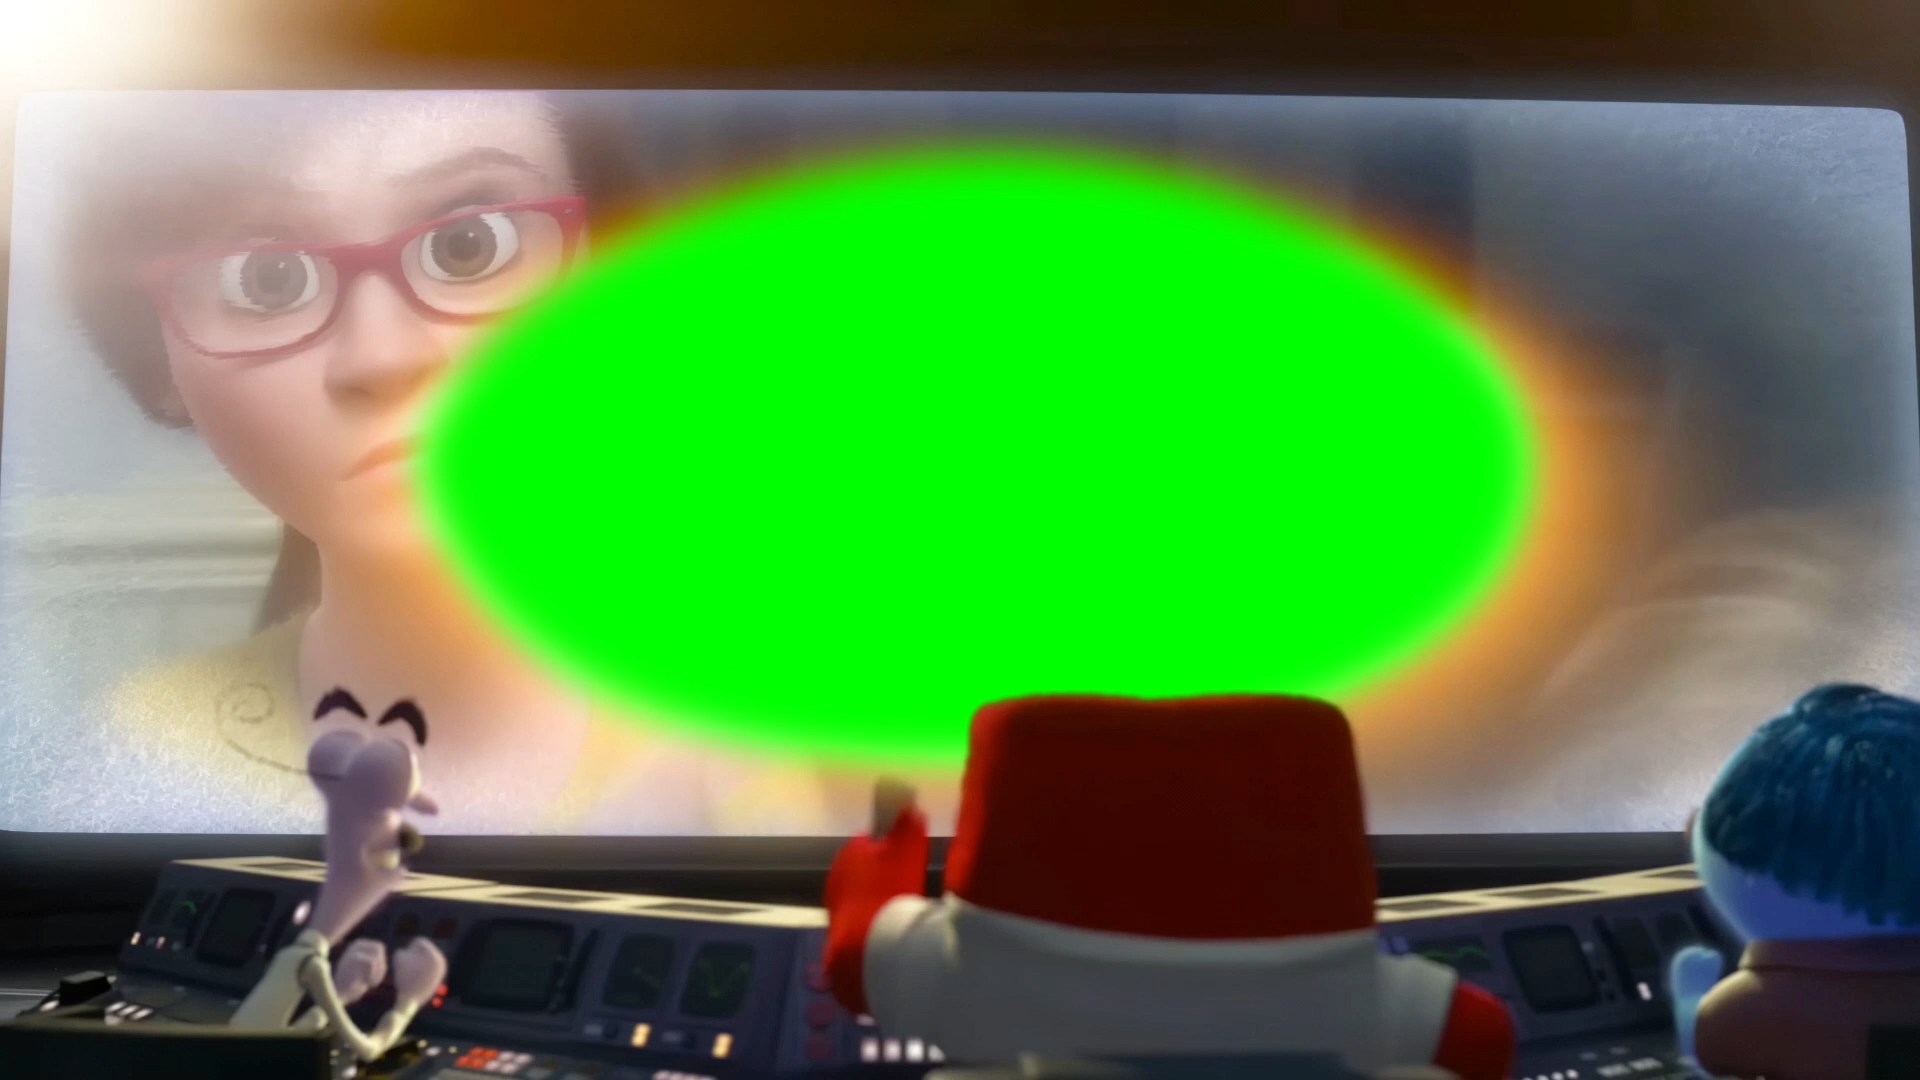 Inside Out meme - Do You Ever Look at Someone and Wonder, What Is Going On Inside Their Head! (Green Screen)